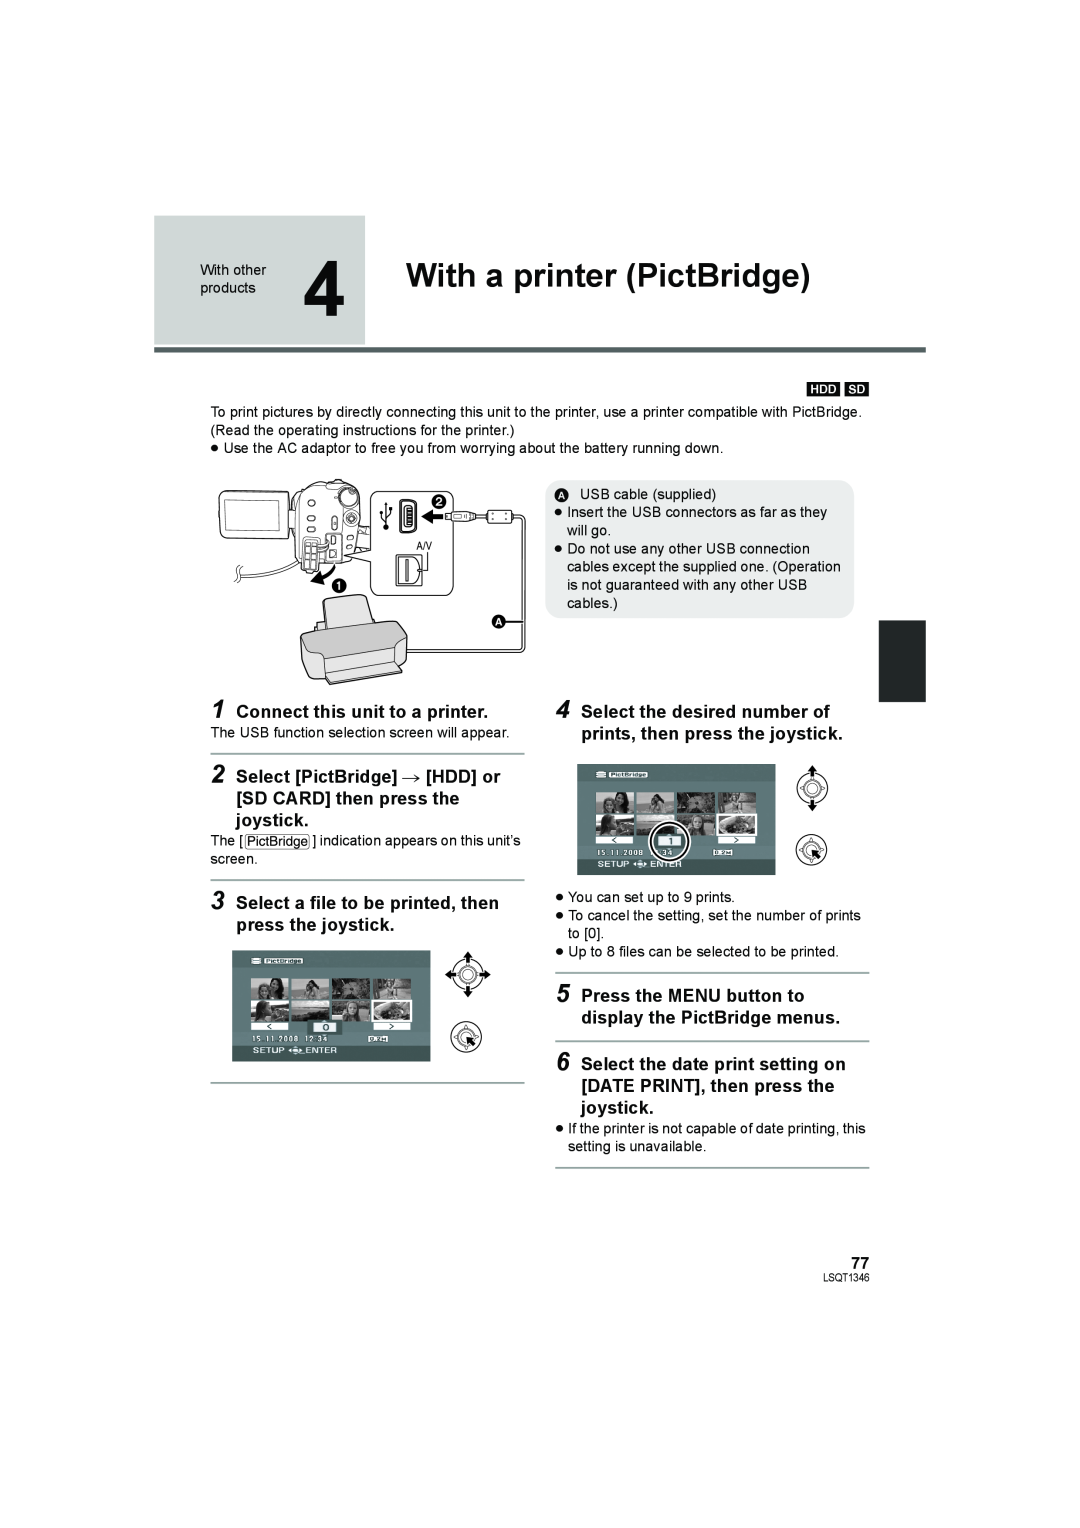 Panasonic SDR-H50 operating instructions With a printer PictBridge, Connect this unit to a printer 